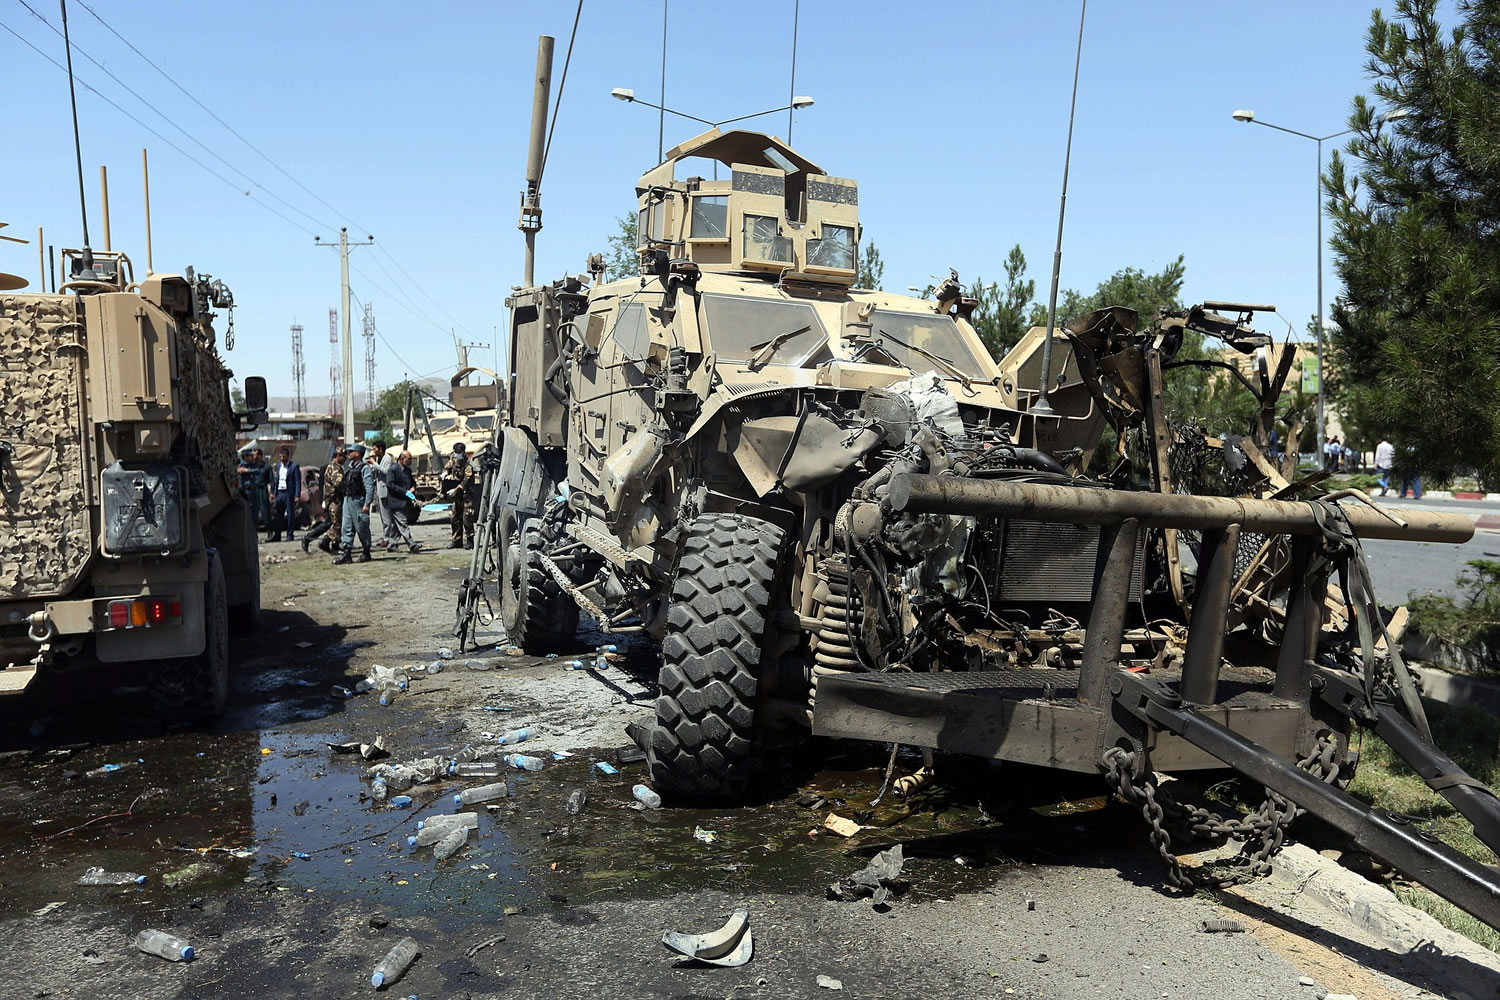 A destroyed armored vehicle remains at the site of a suicide attack on a NATO convoy in Kabul, Afghanistan, Tuesday, June 30, 2015. It comes a week after an audacious attack on the nation's parliament, which highlighted the ability of insurgents, who have been fighting to overthrow the Kabul government for almost 14 years, to enter the highly fortified capital to stage deadly attacks.